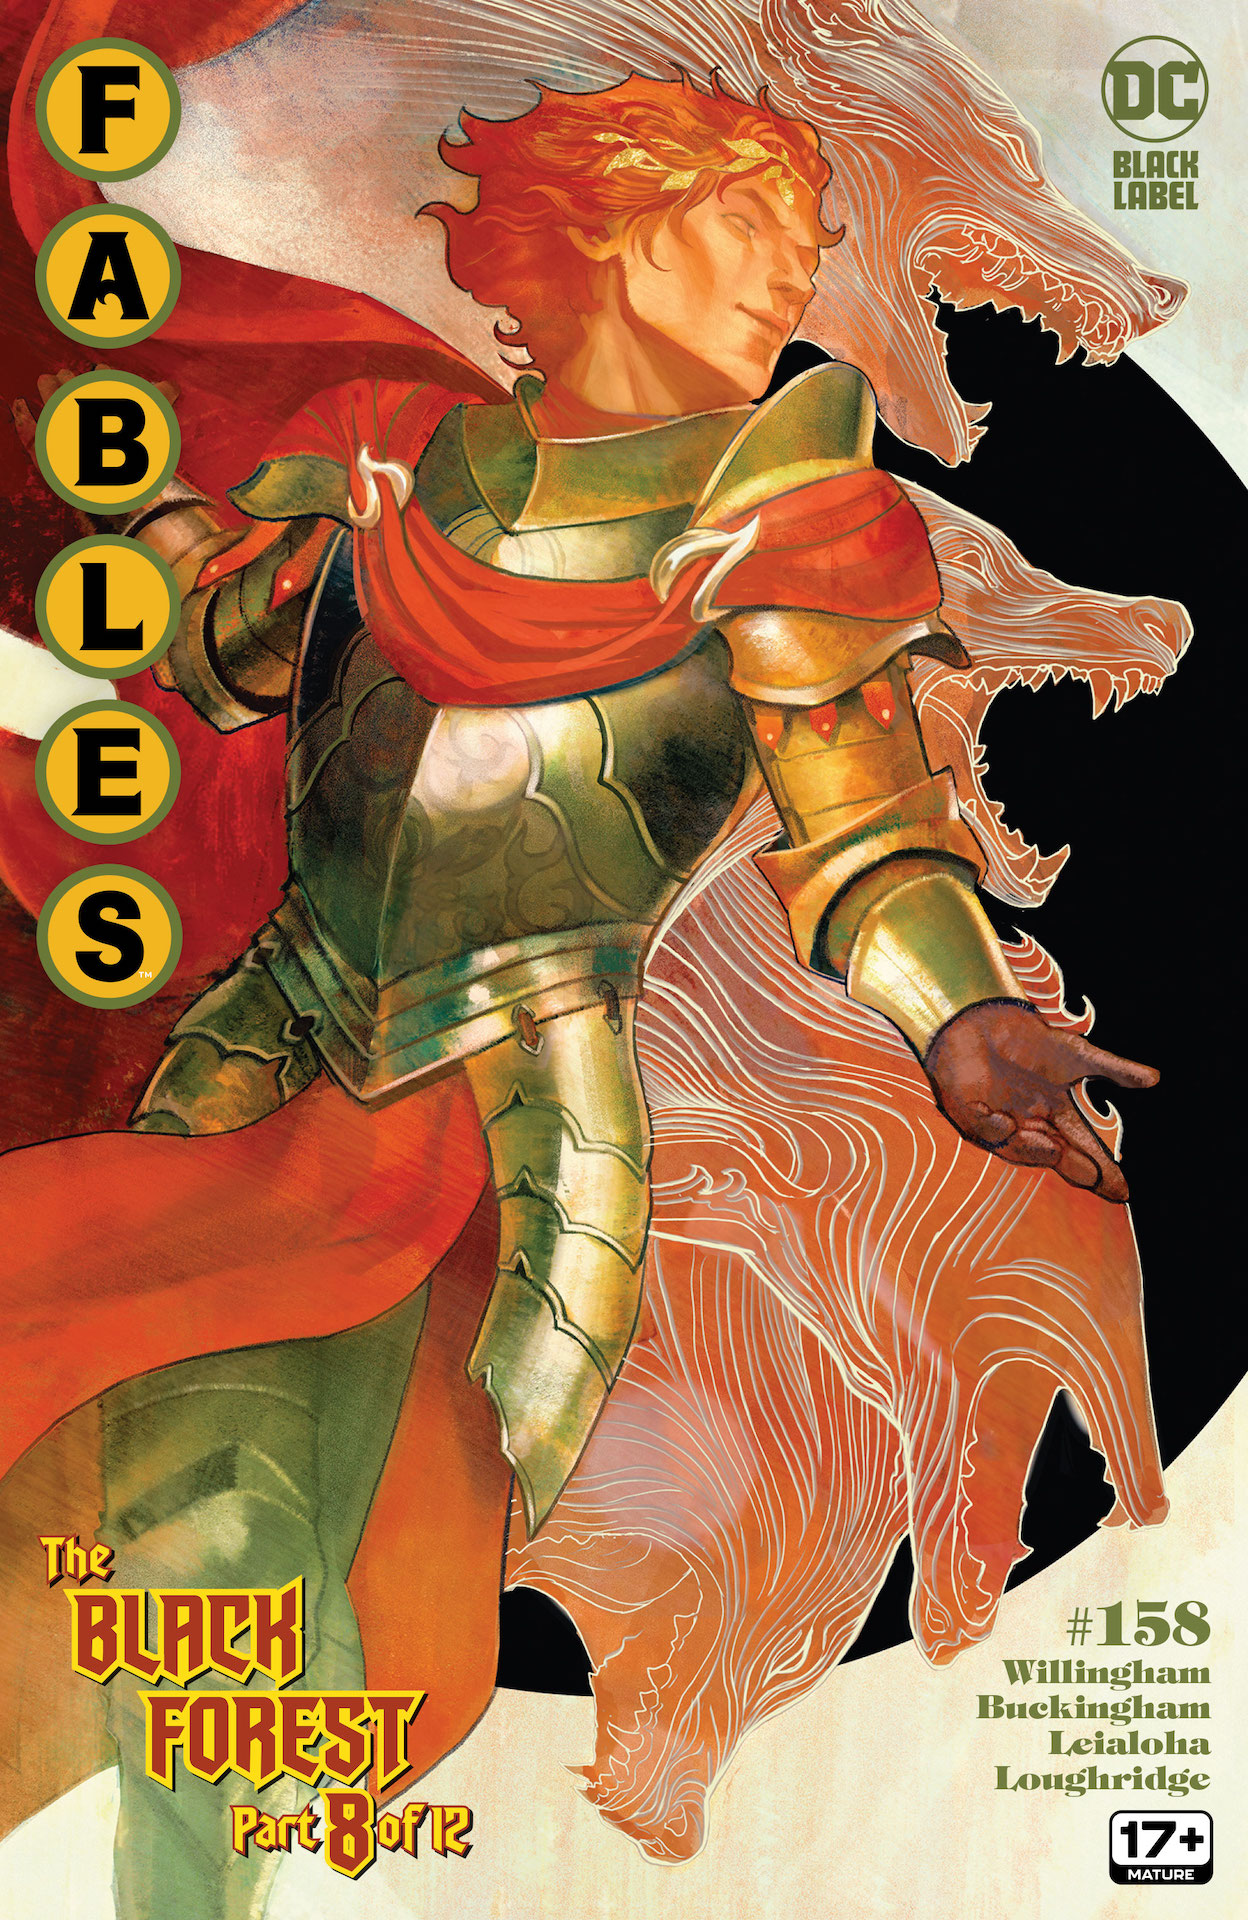 DC Preview: Fables #158